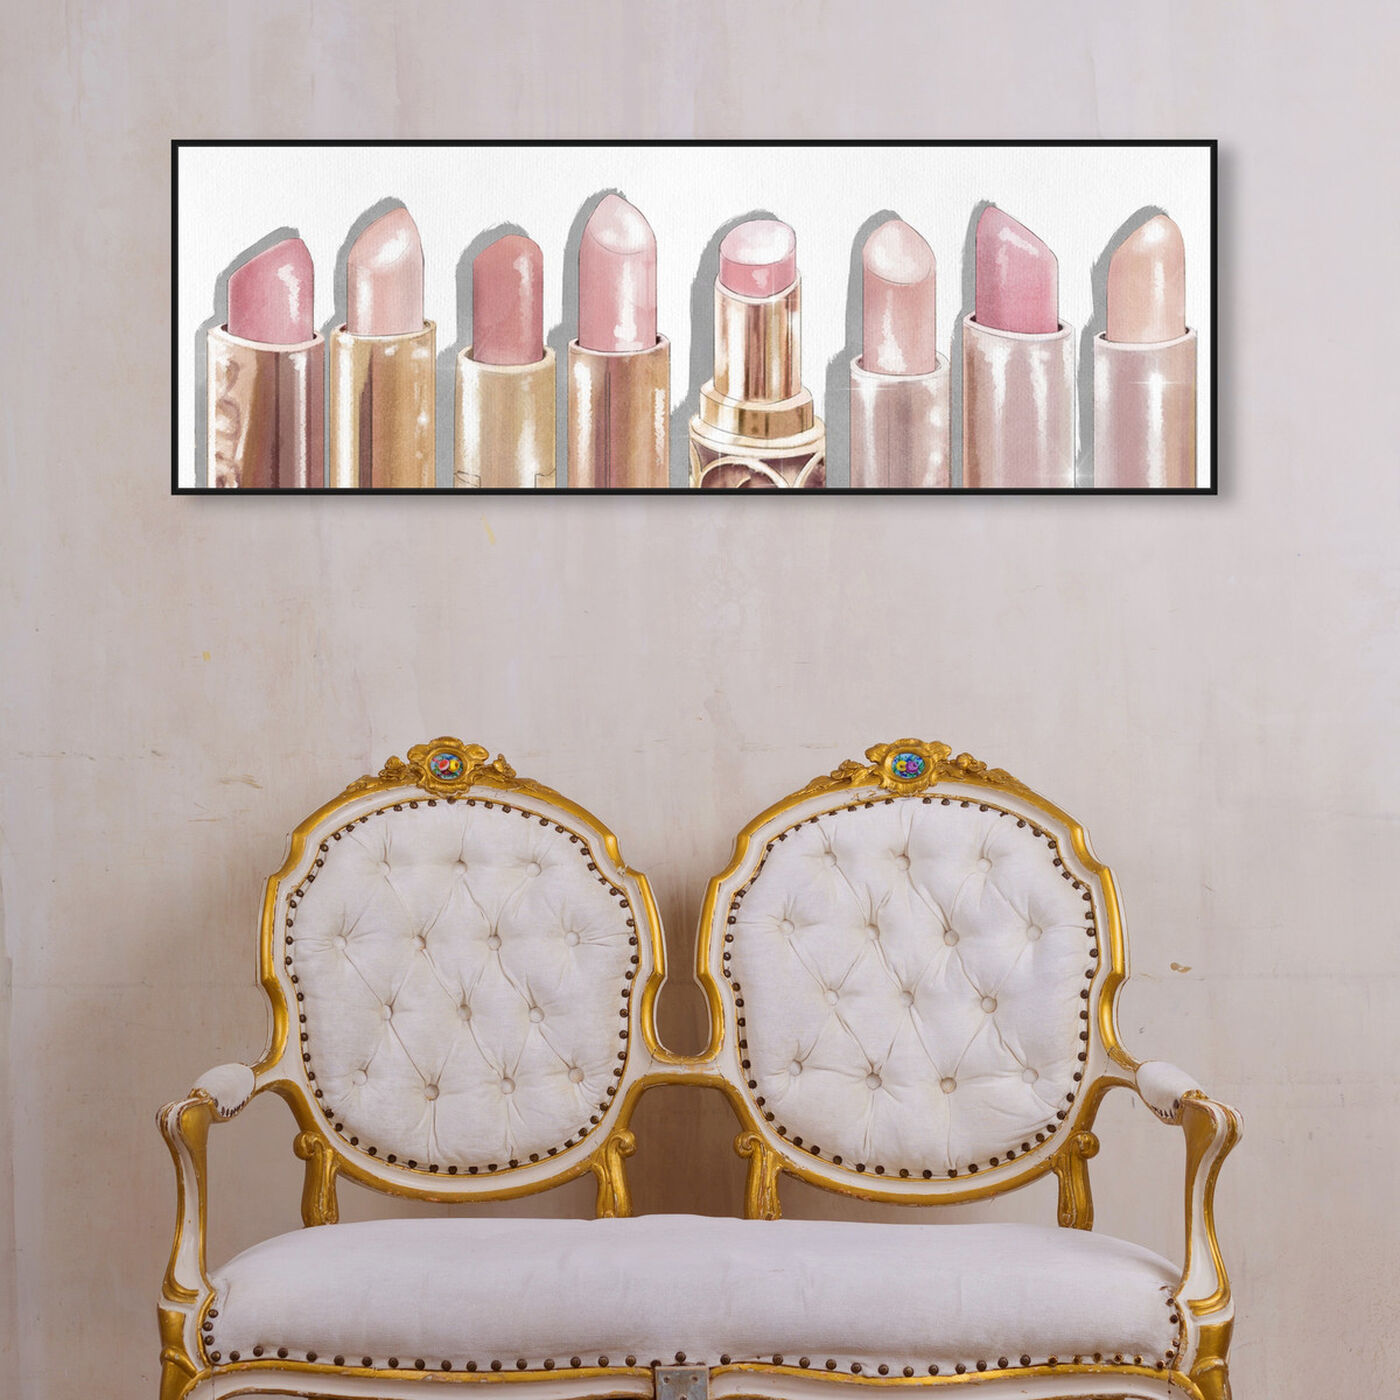 Hanging view of Lipstick Shades featuring fashion and glam and makeup art.